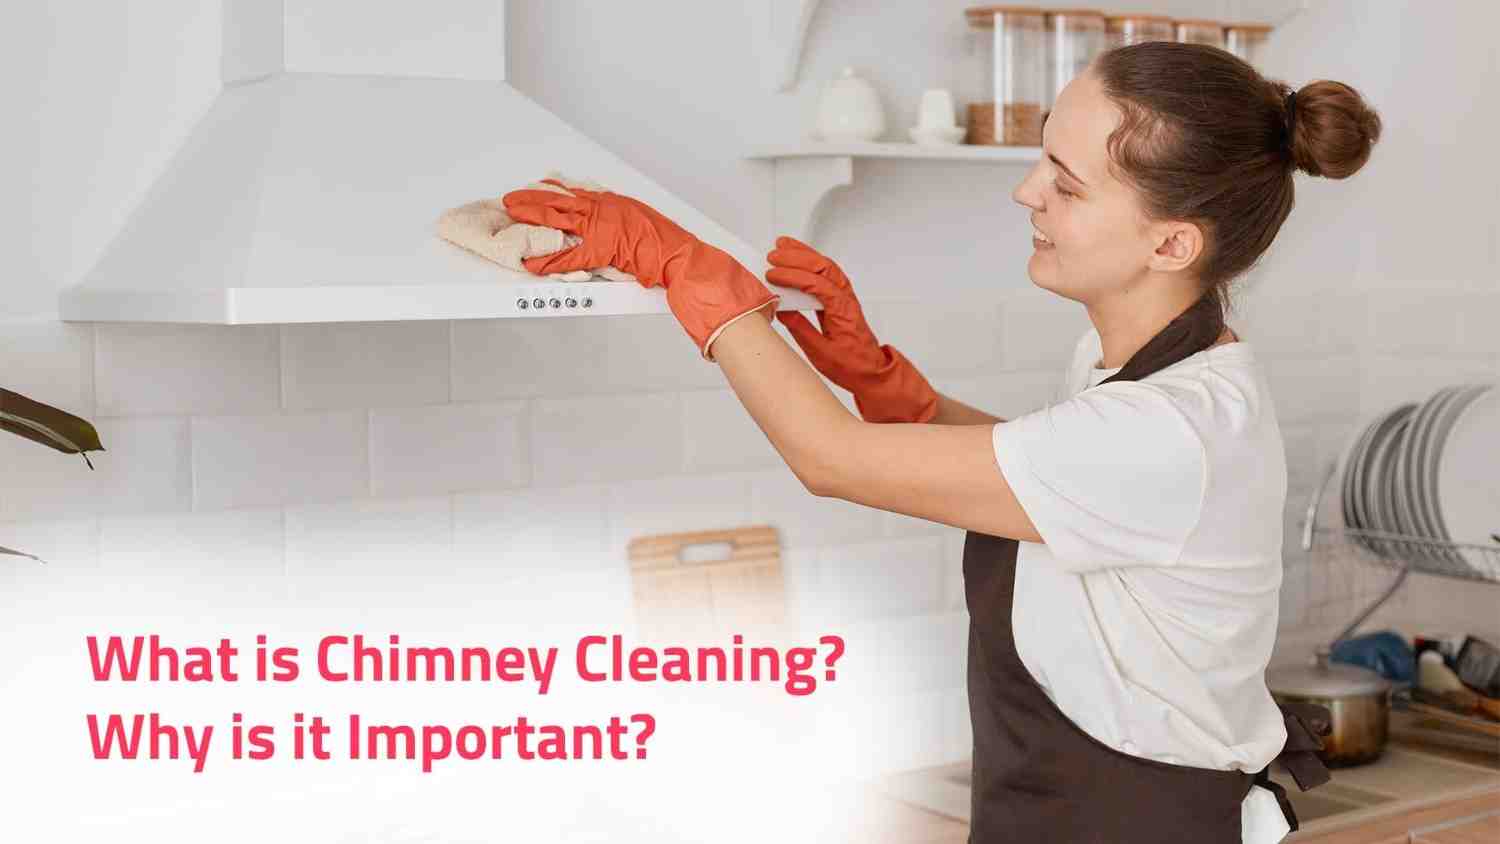 What is Chimney Cleaning? Why is it Important?